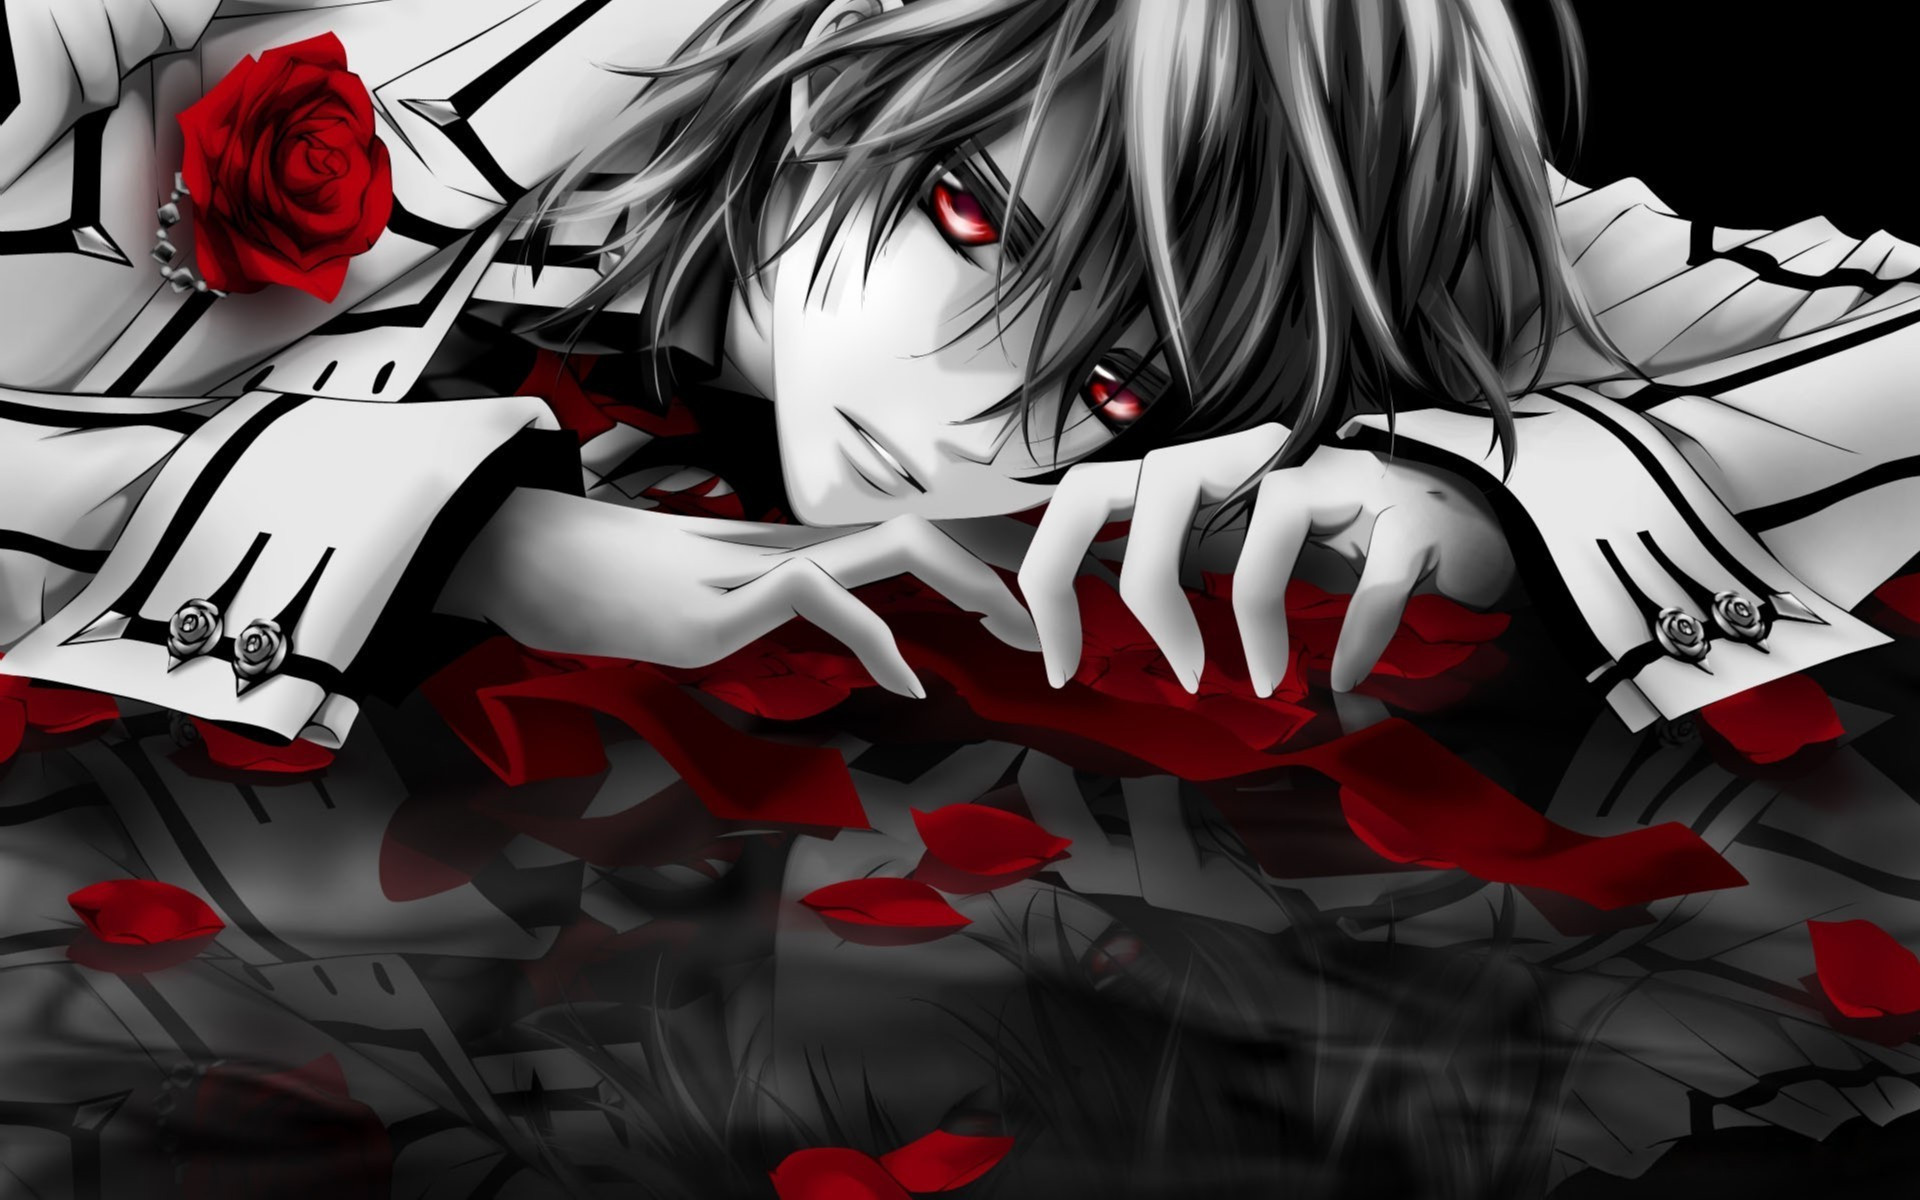 1920x1200 39 images about Kaname kuran on We Heart It | See more about vampire knight,  anime and manga